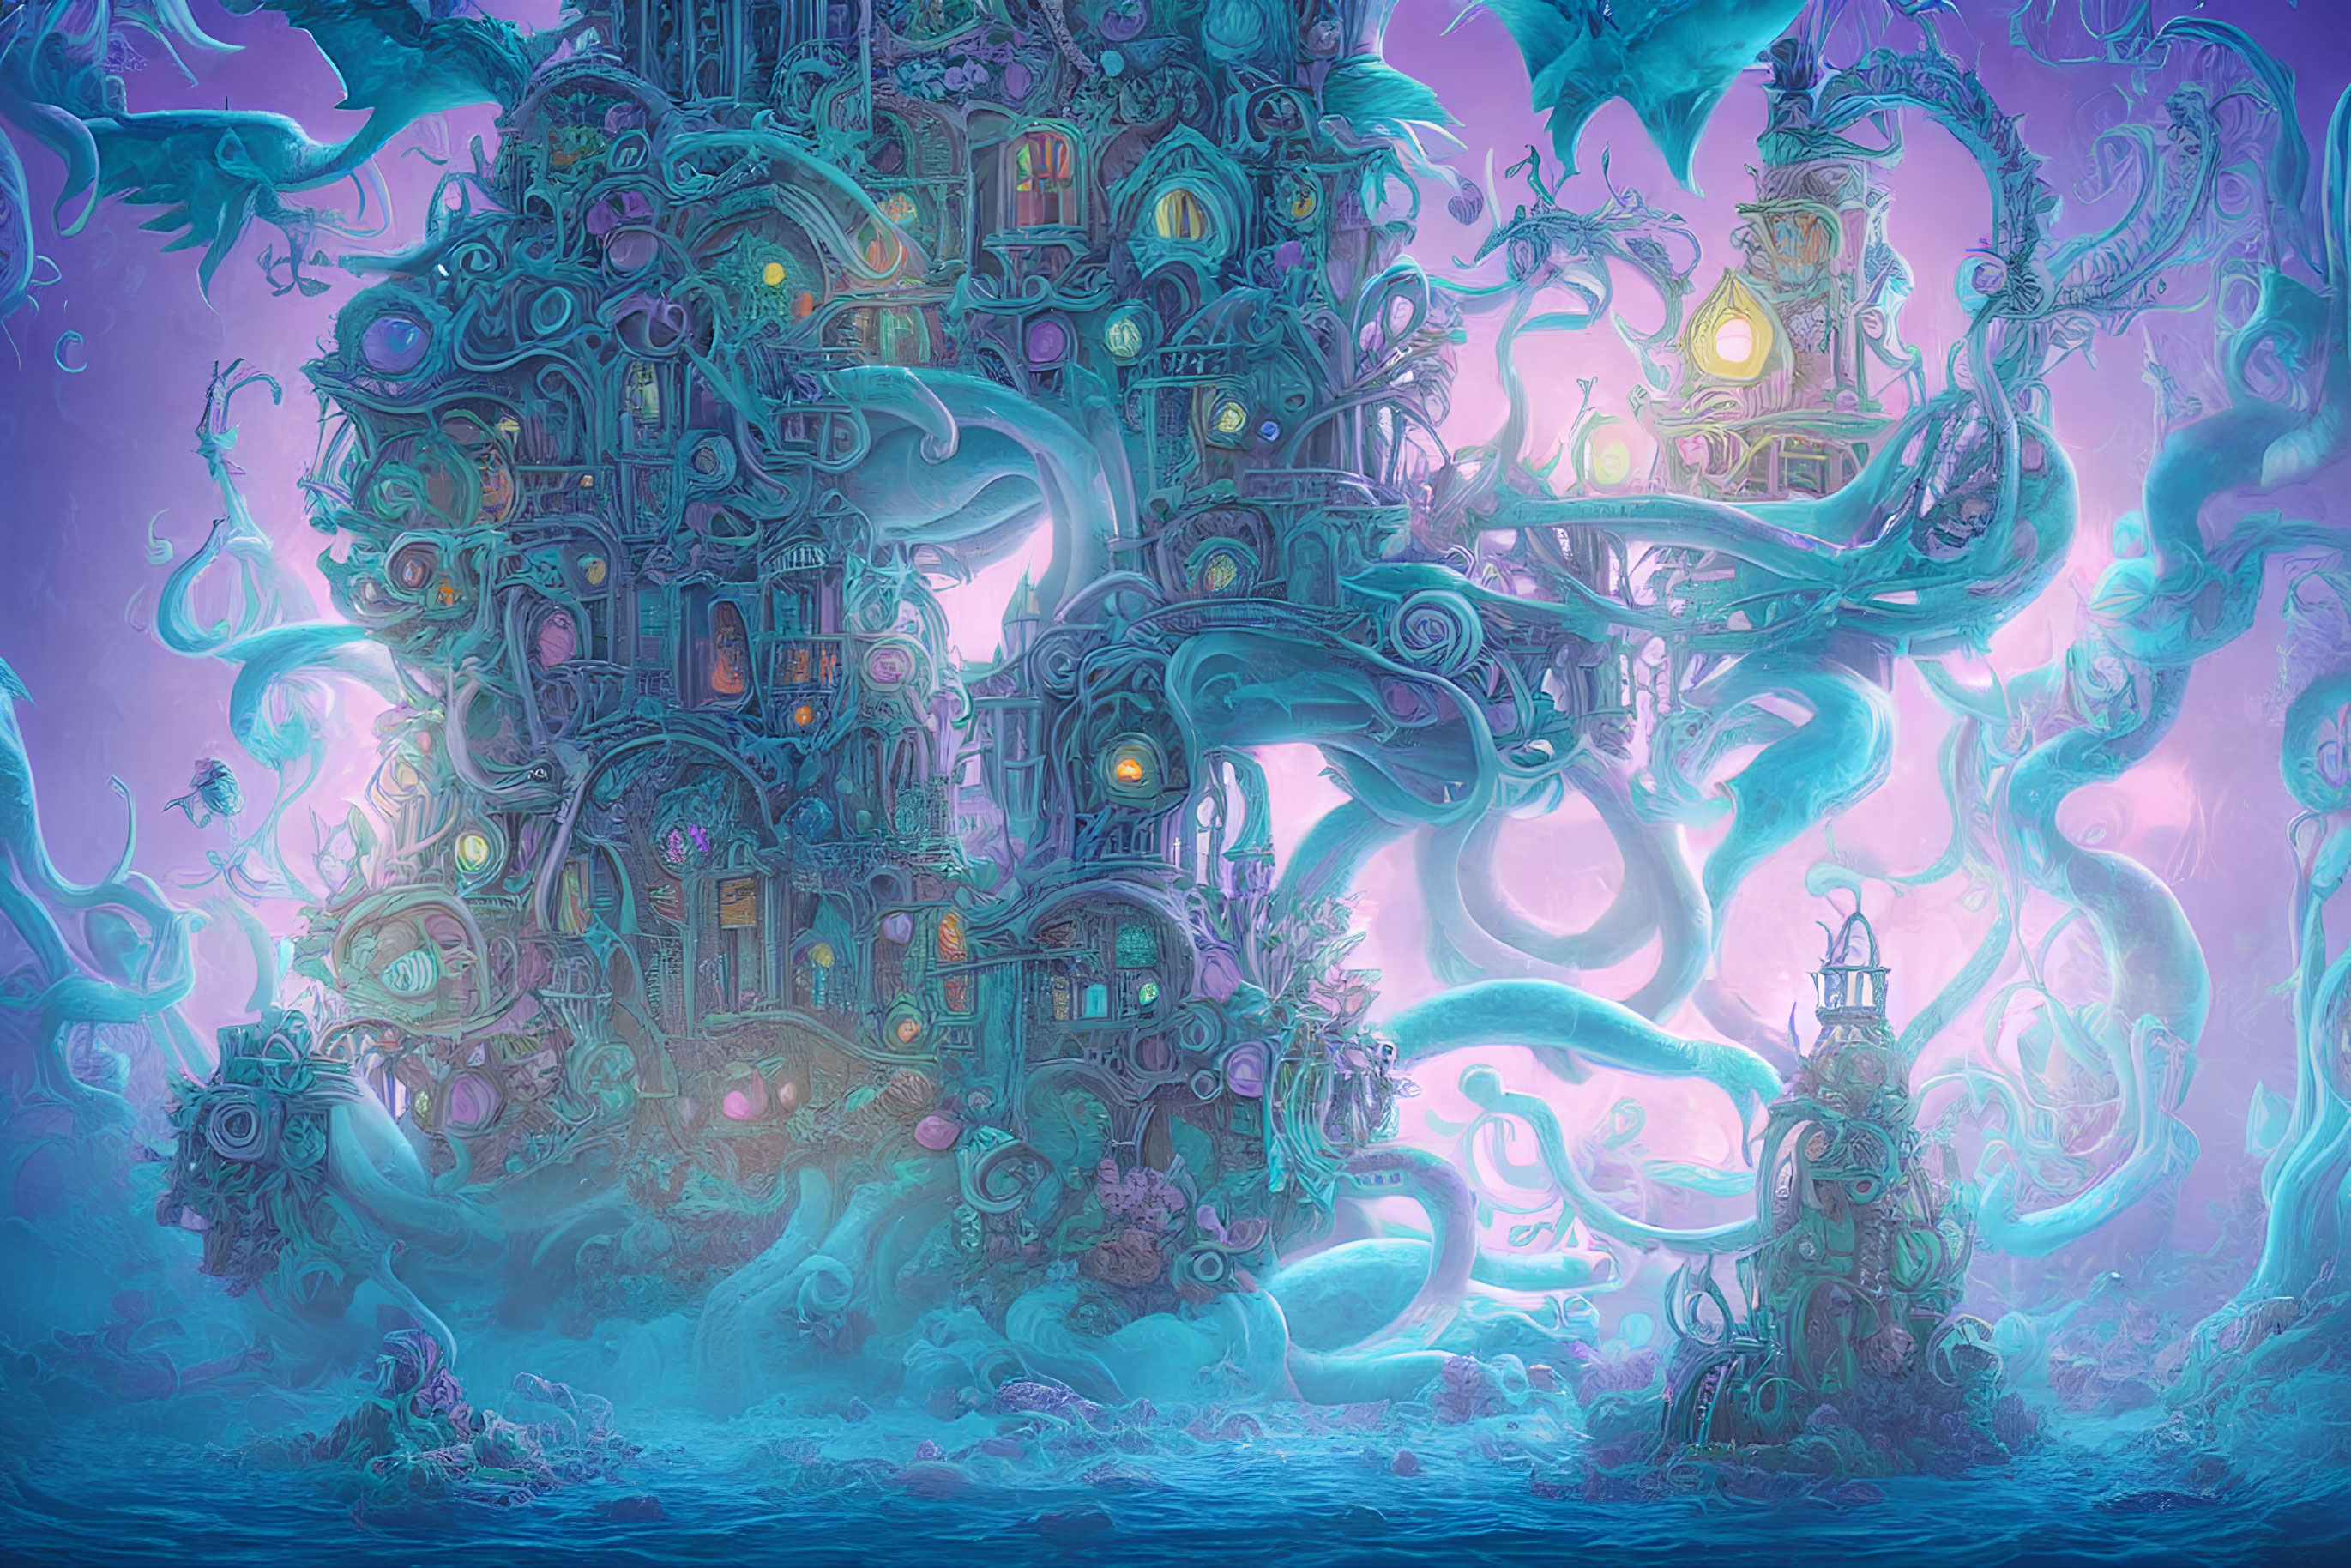 Intricate towers and swirling tentacles in a fantastical underwater city